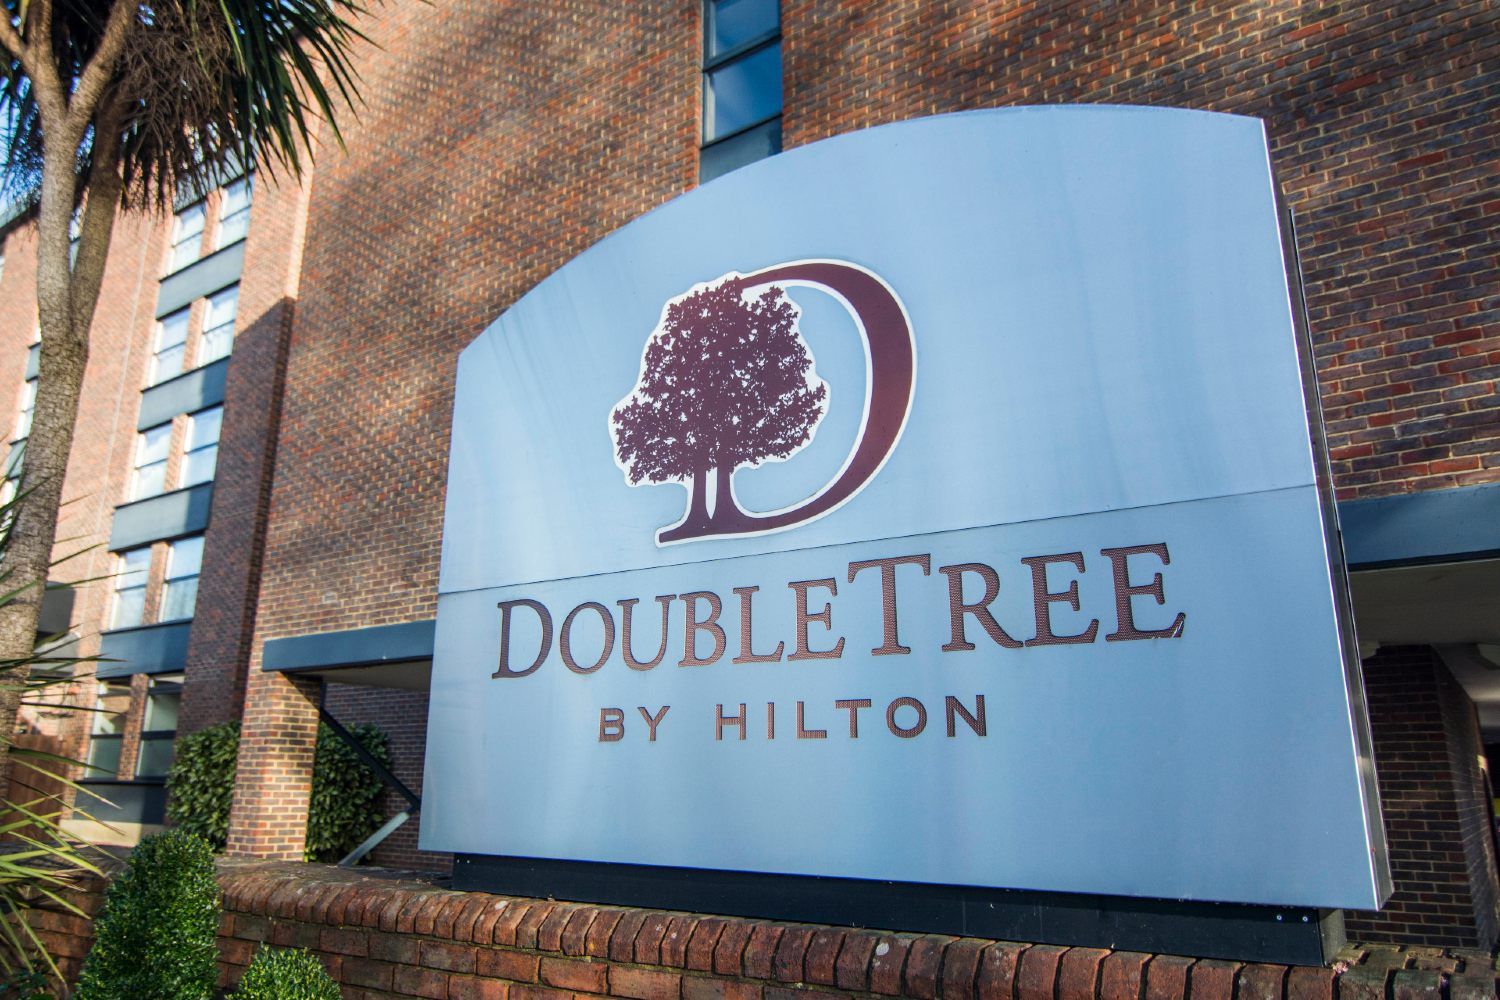 DoubleTree by Hilton sign in front of building - DoubleTree hotel franchise